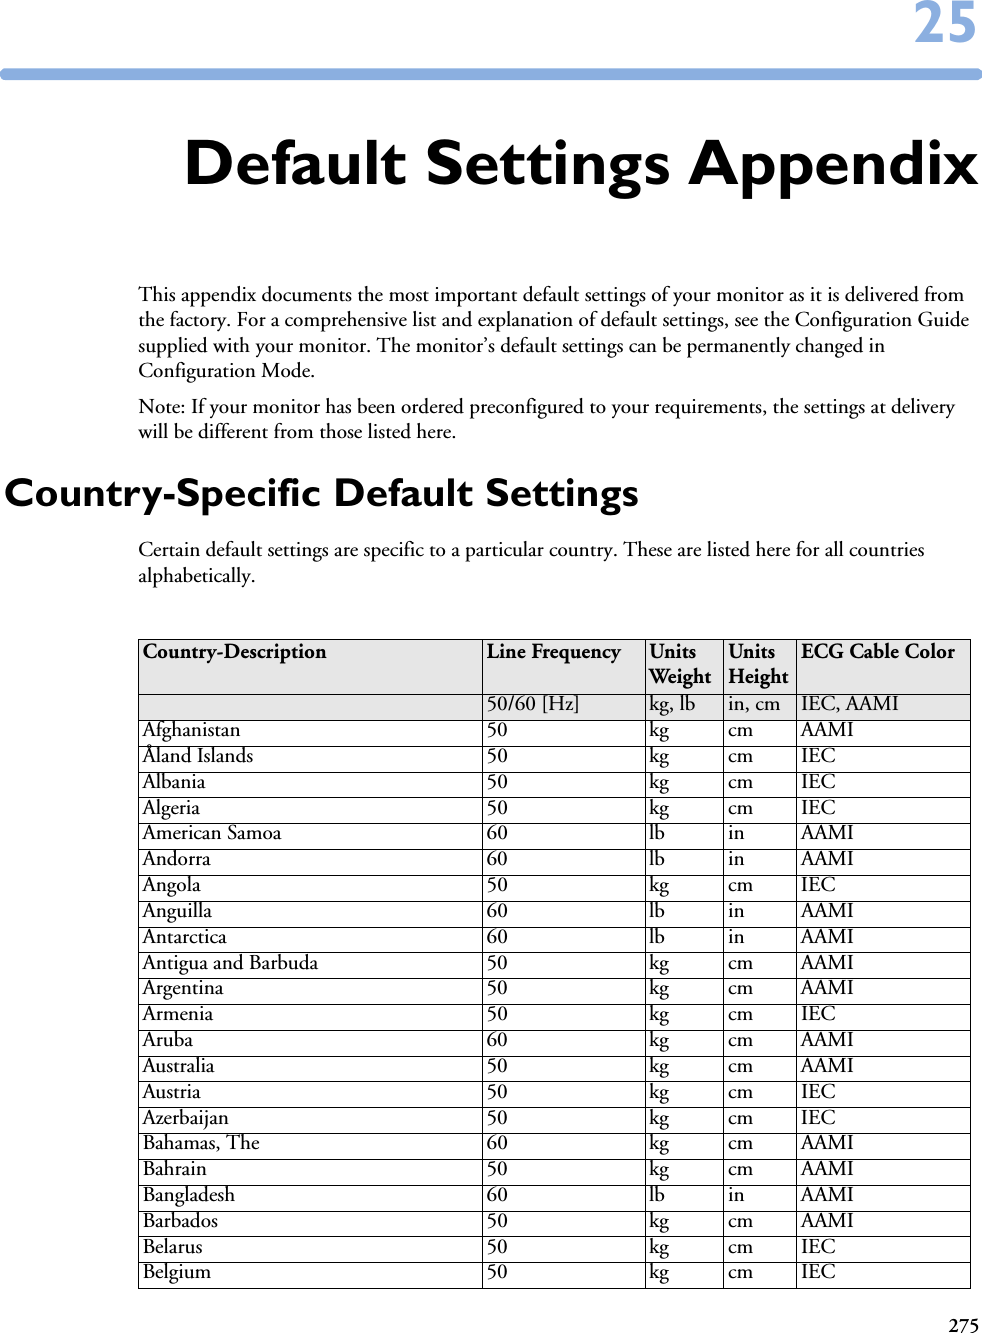 2752525Default Settings AppendixThis appendix documents the most important default settings of your monitor as it is delivered from the factory. For a comprehensive list and explanation of default settings, see the Configuration Guide supplied with your monitor. The monitor’s default settings can be permanently changed in Configuration Mode. Note: If your monitor has been ordered preconfigured to your requirements, the settings at delivery will be different from those listed here. Country-Specific Default SettingsCertain default settings are specific to a particular country. These are listed here for all countries alphabetically.Country-Description Line Frequency UnitsWeightUnitsHeightECG Cable Color50/60 [Hz] kg, lb in, cm IEC, AAMIAfghanistan 50 kg cm AAMIÅland Islands 50 kg cm IECAlbania 50 kg cm IECAlgeria 50 kg cm IECAmerican Samoa 60 lb in AAMIAndorra 60 lb in AAMIAngola 50 kg cm IECAnguilla 60 lb in AAMIAntarctica 60 lb in AAMIAntigua and Barbuda 50 kg cm AAMIArgentina 50 kg cm AAMIArmenia 50 kg cm IECAruba 60 kg cm AAMIAustralia 50 kg cm AAMIAustria 50 kg cm IECAzerbaijan 50 kg cm IECBahamas, The 60 kg cm AAMIBahrain 50 kg cm AAMIBangladesh 60 lb in AAMIBarbados 50 kg cm AAMIBelarus 50 kg cm IECBelgium 50 kg cm IEC